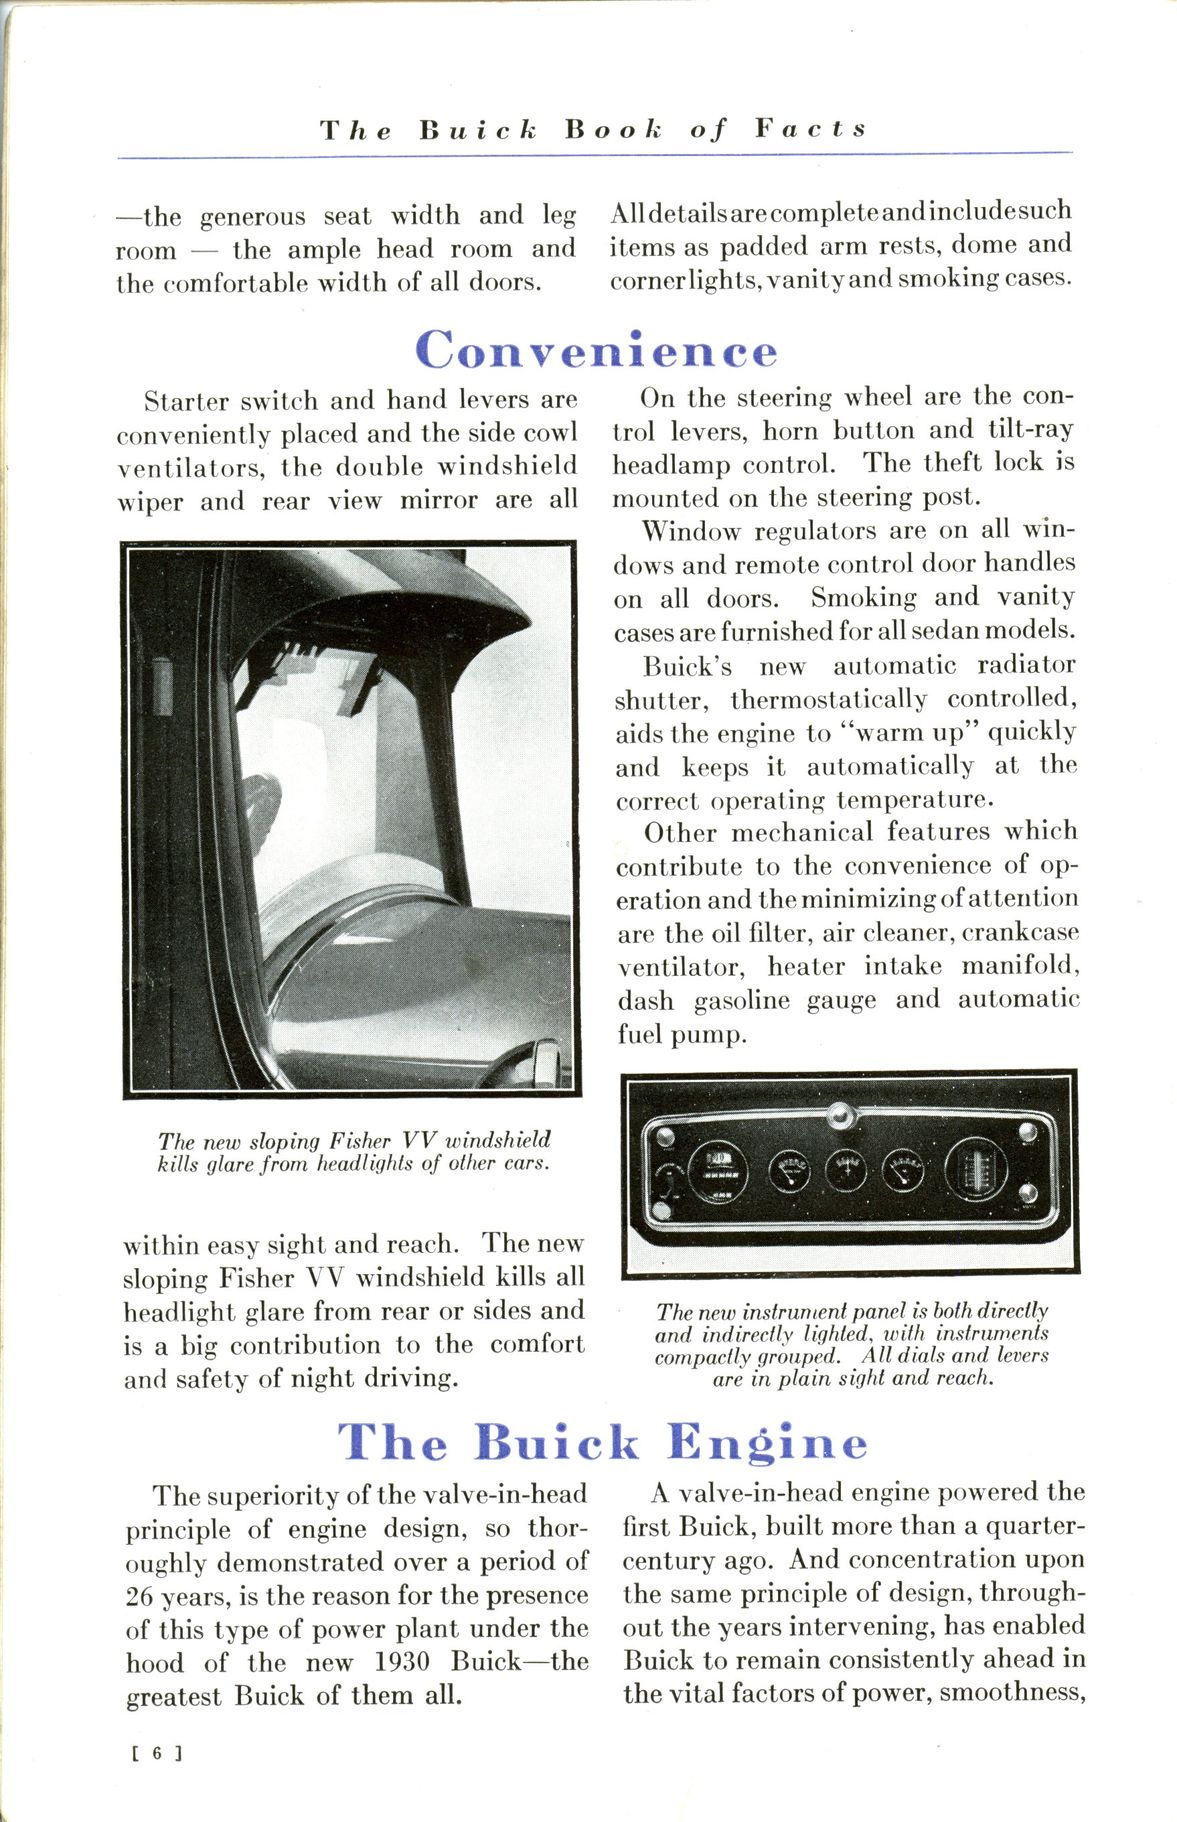 1930 Buick Book of Facts-06